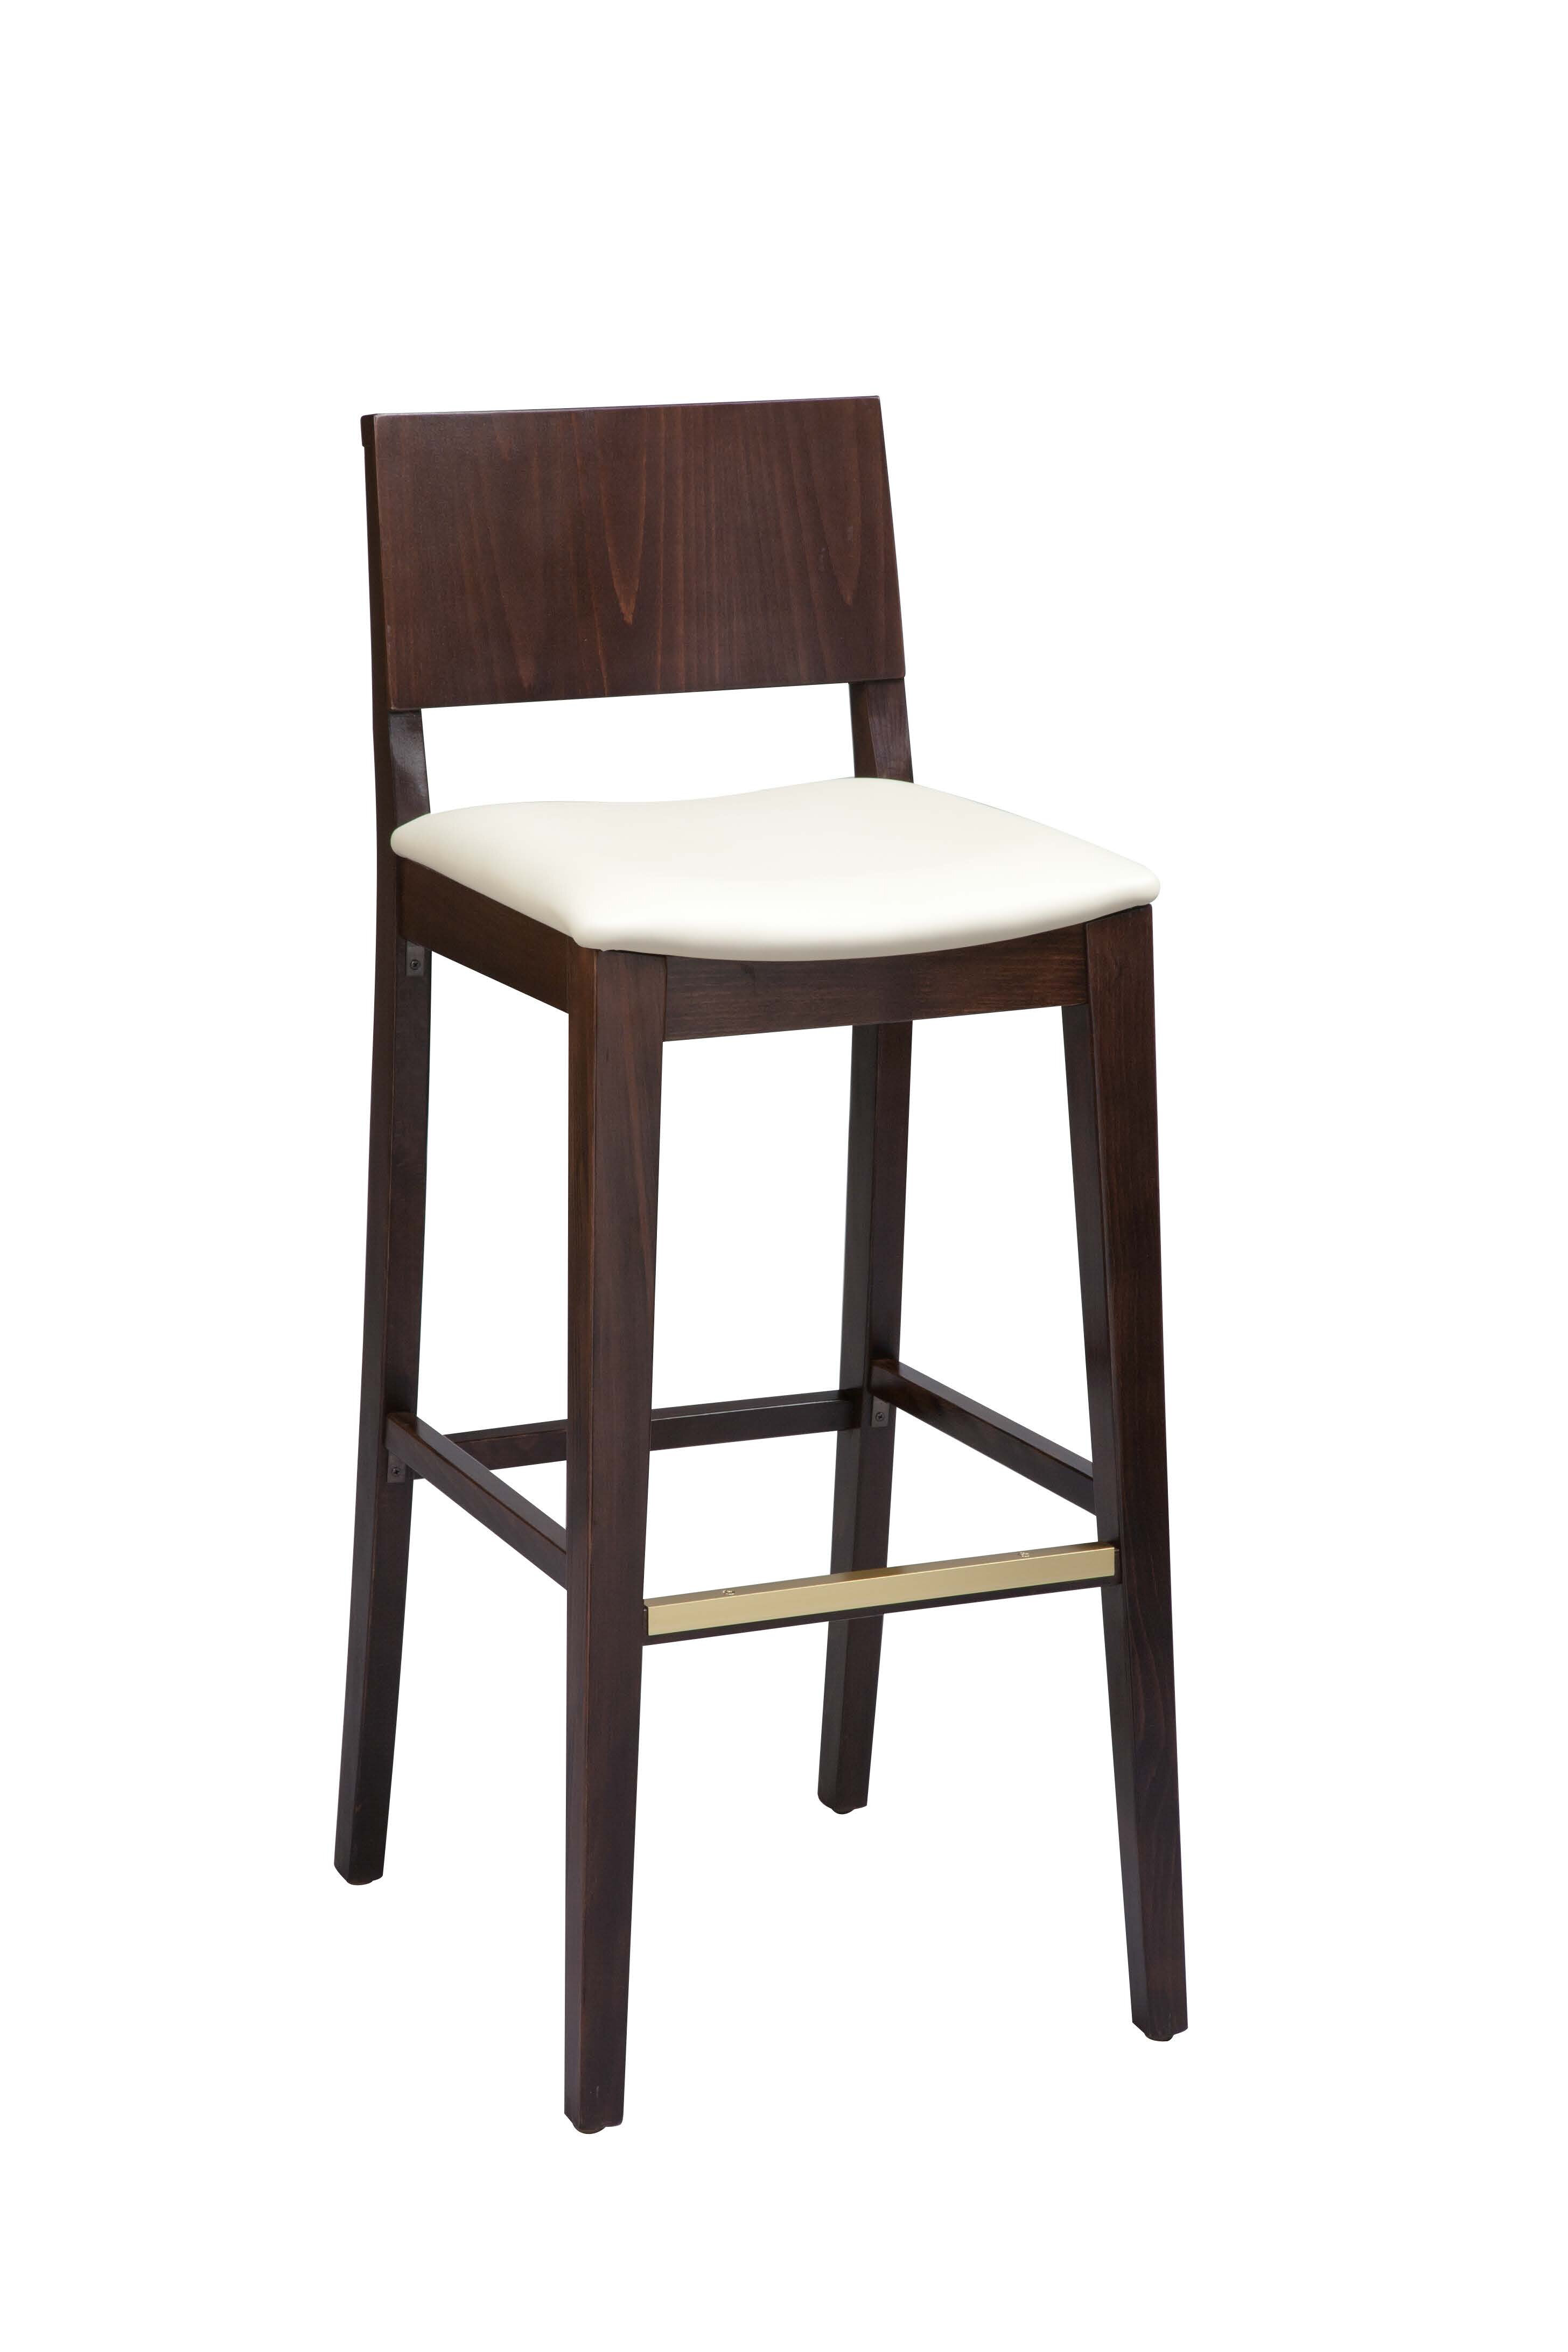 Flip Back Maple Stool with Stool Top Color Choices